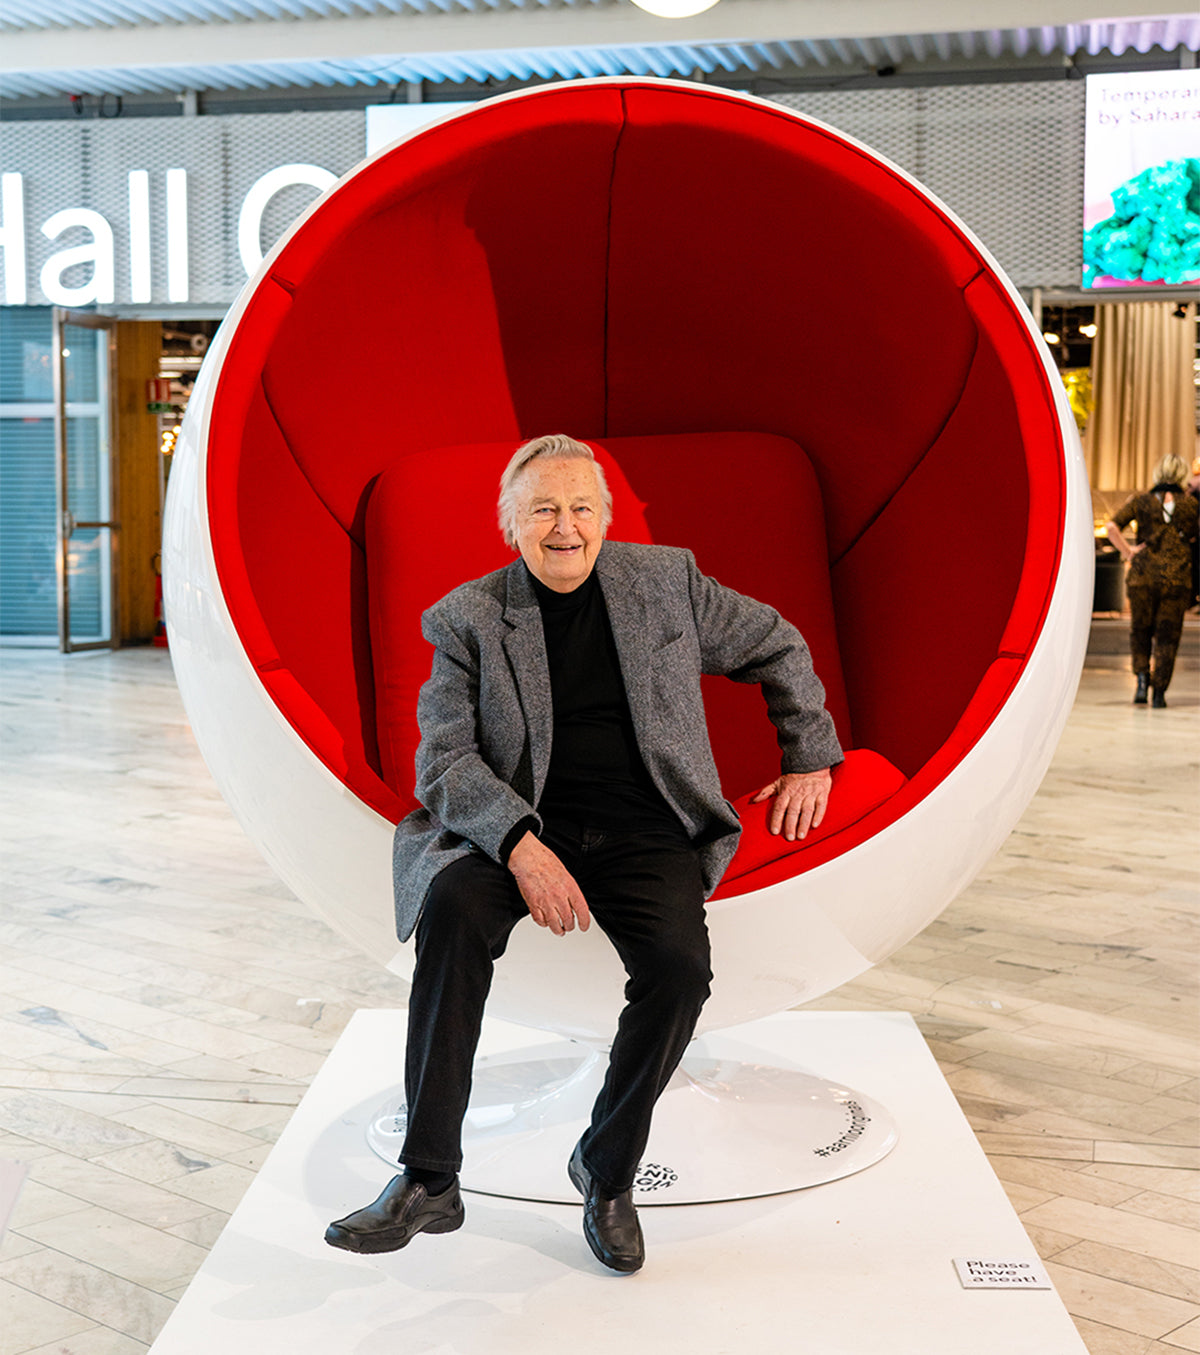 The Giant Ball Chair